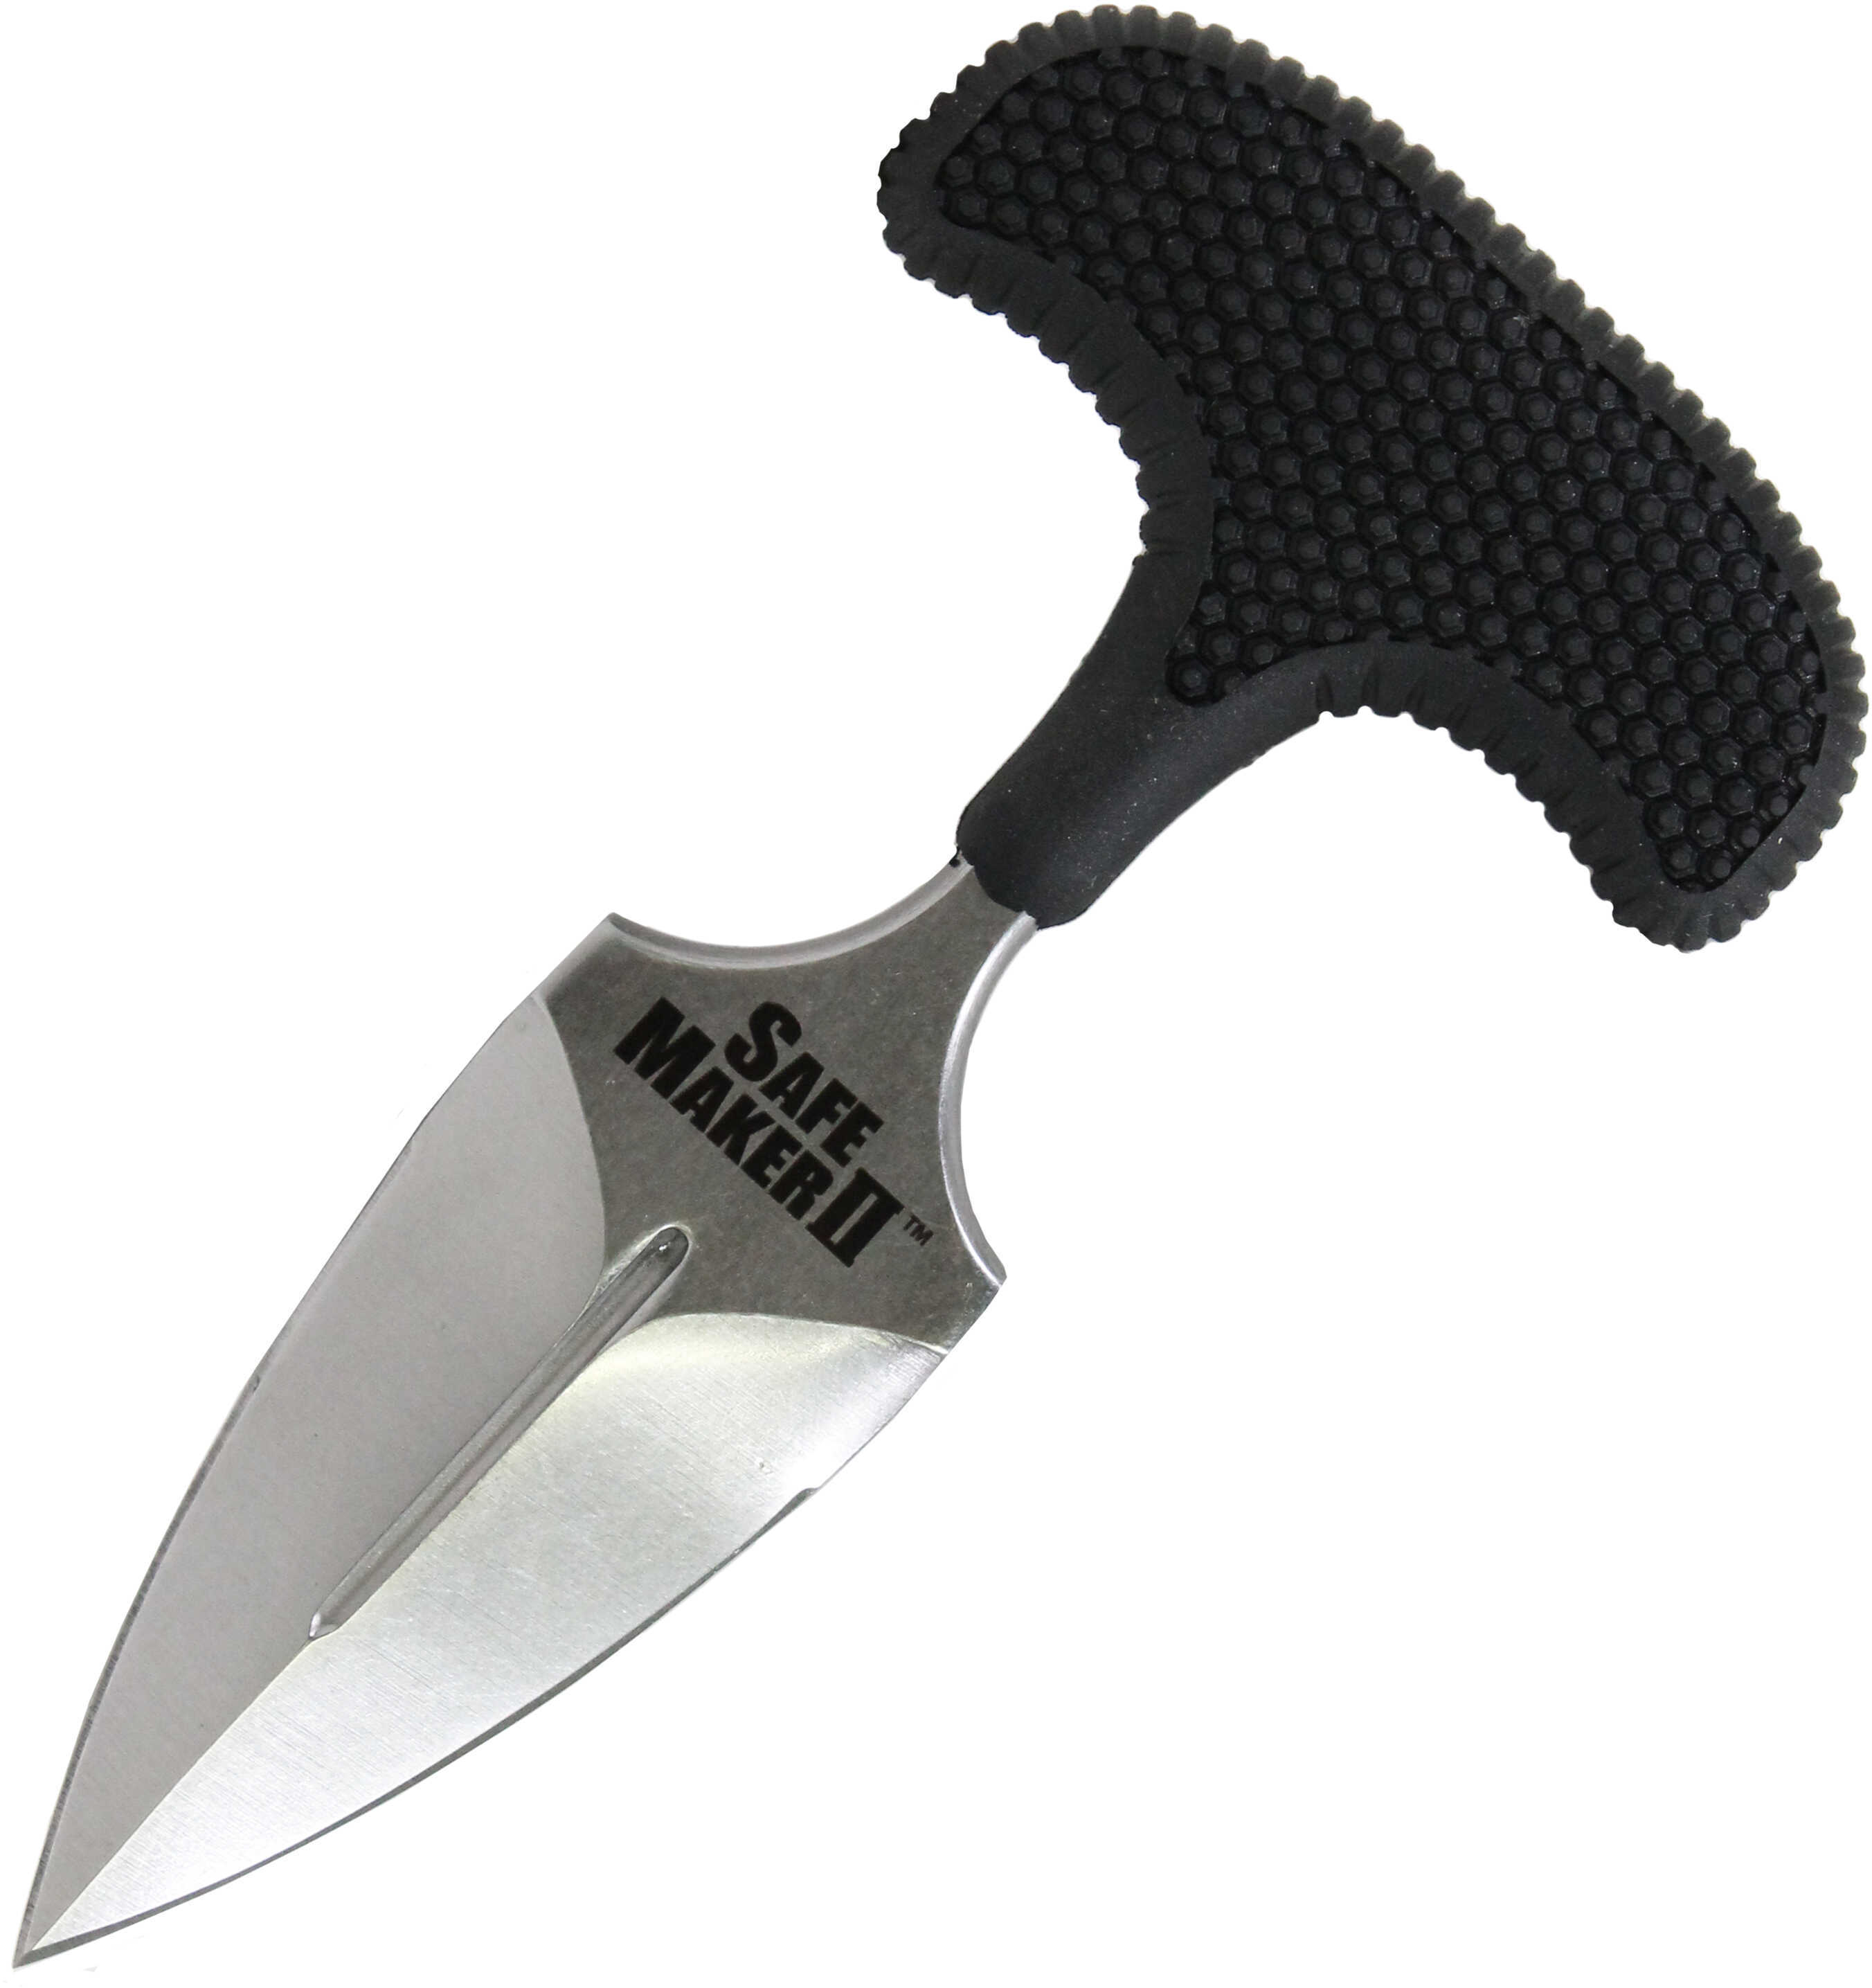 Cold Steel Cs-12DCST Safe Maker II 3.25" Fixed Spear Point Plain Stone Washed AUS-8A SS Blade/ Black Textured Kray-Ex Ha